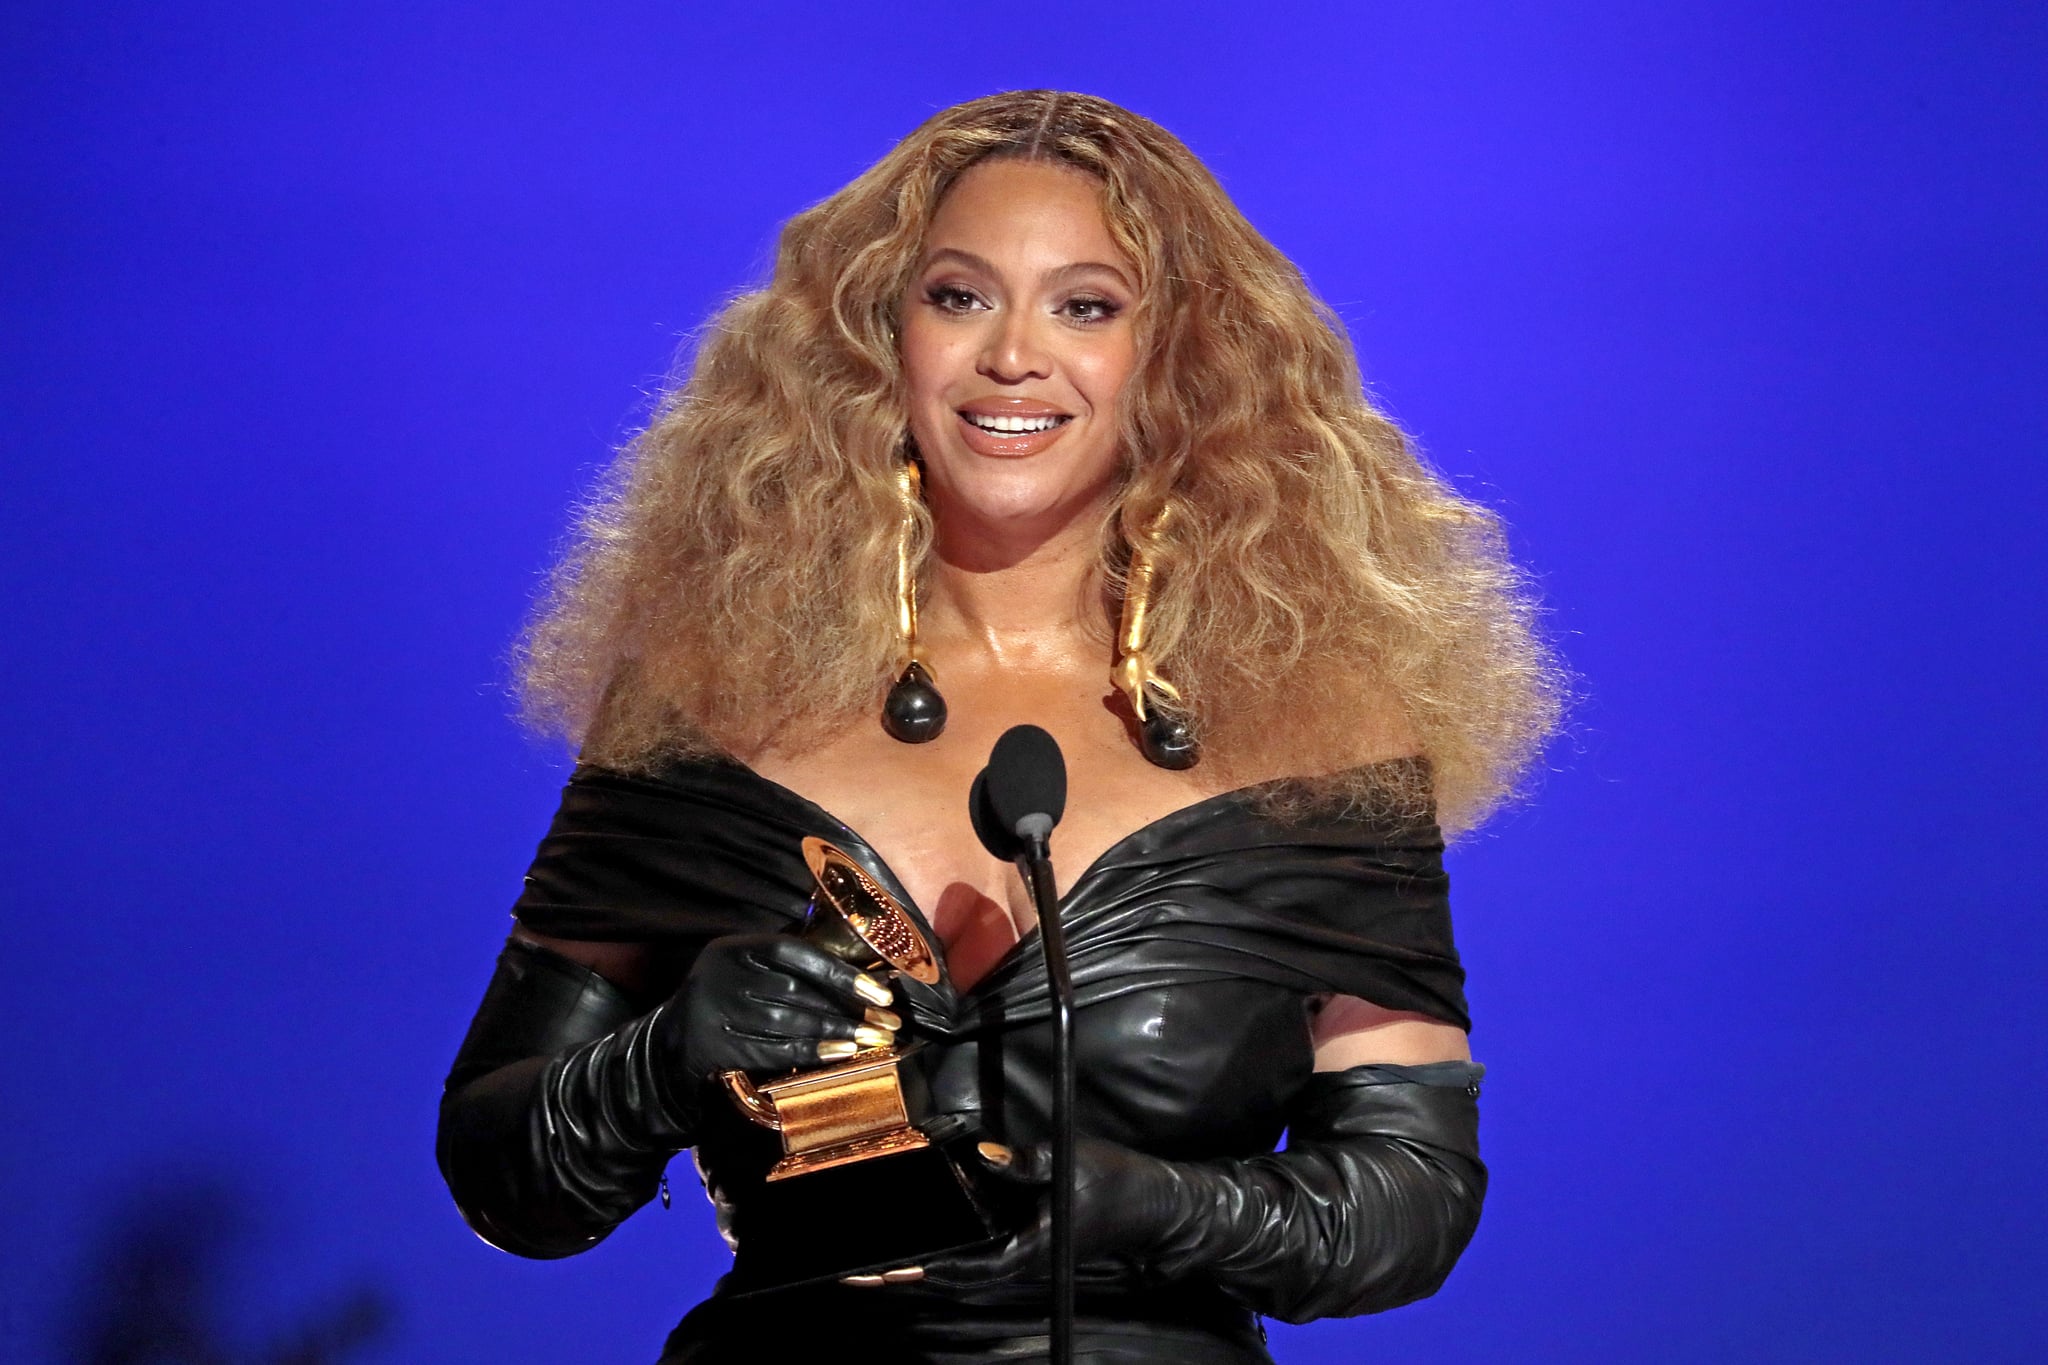 Los Angeles, CA, Sunday, March 14, 2021 - Beyonce makes History with the Best E&B Performance winning 28 Grammys, more that any female or male performer, accepts the award for Best R&B Performance at the 63rd Grammy Award outside Staples Center. (Robert Gauthier/Los Angeles Times via Getty Images)Los Angeles, CA, Sunday, March 14, 2021 - Beyonce makes History with the Best E&B Performance winning 28 Grammys, more that any female or male performer, accepts the award for Best R&B Performance at the 63rd Grammy Award outside Staples Center. (Robert Gauthier/Los Angeles Times via Getty Images)